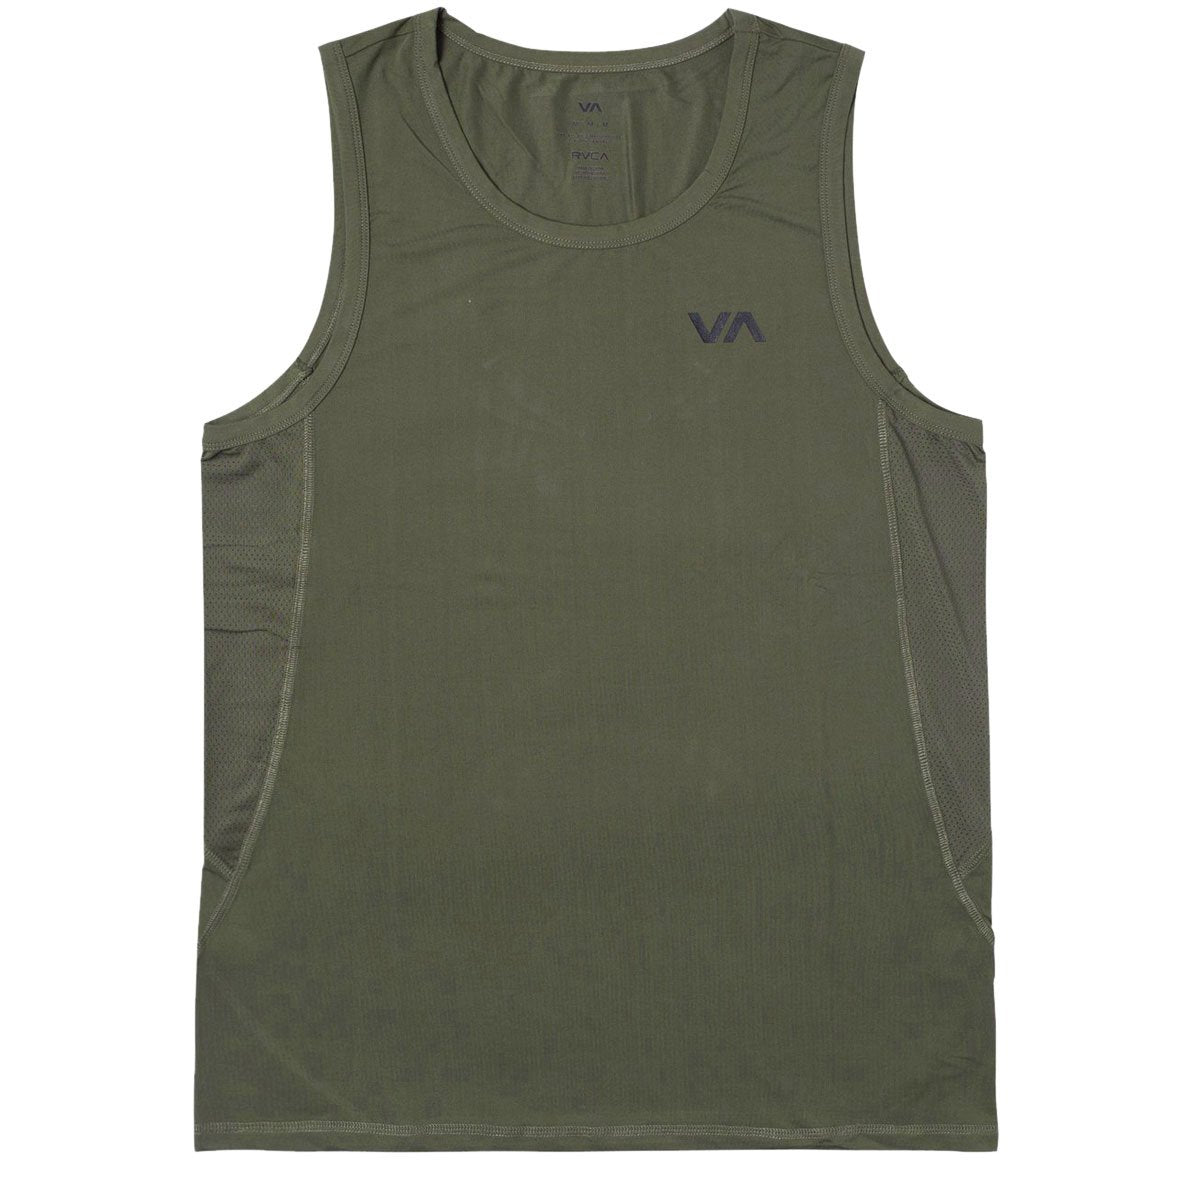 RVCA Sport Vent Sleeve T-Shirt - Olive image 1